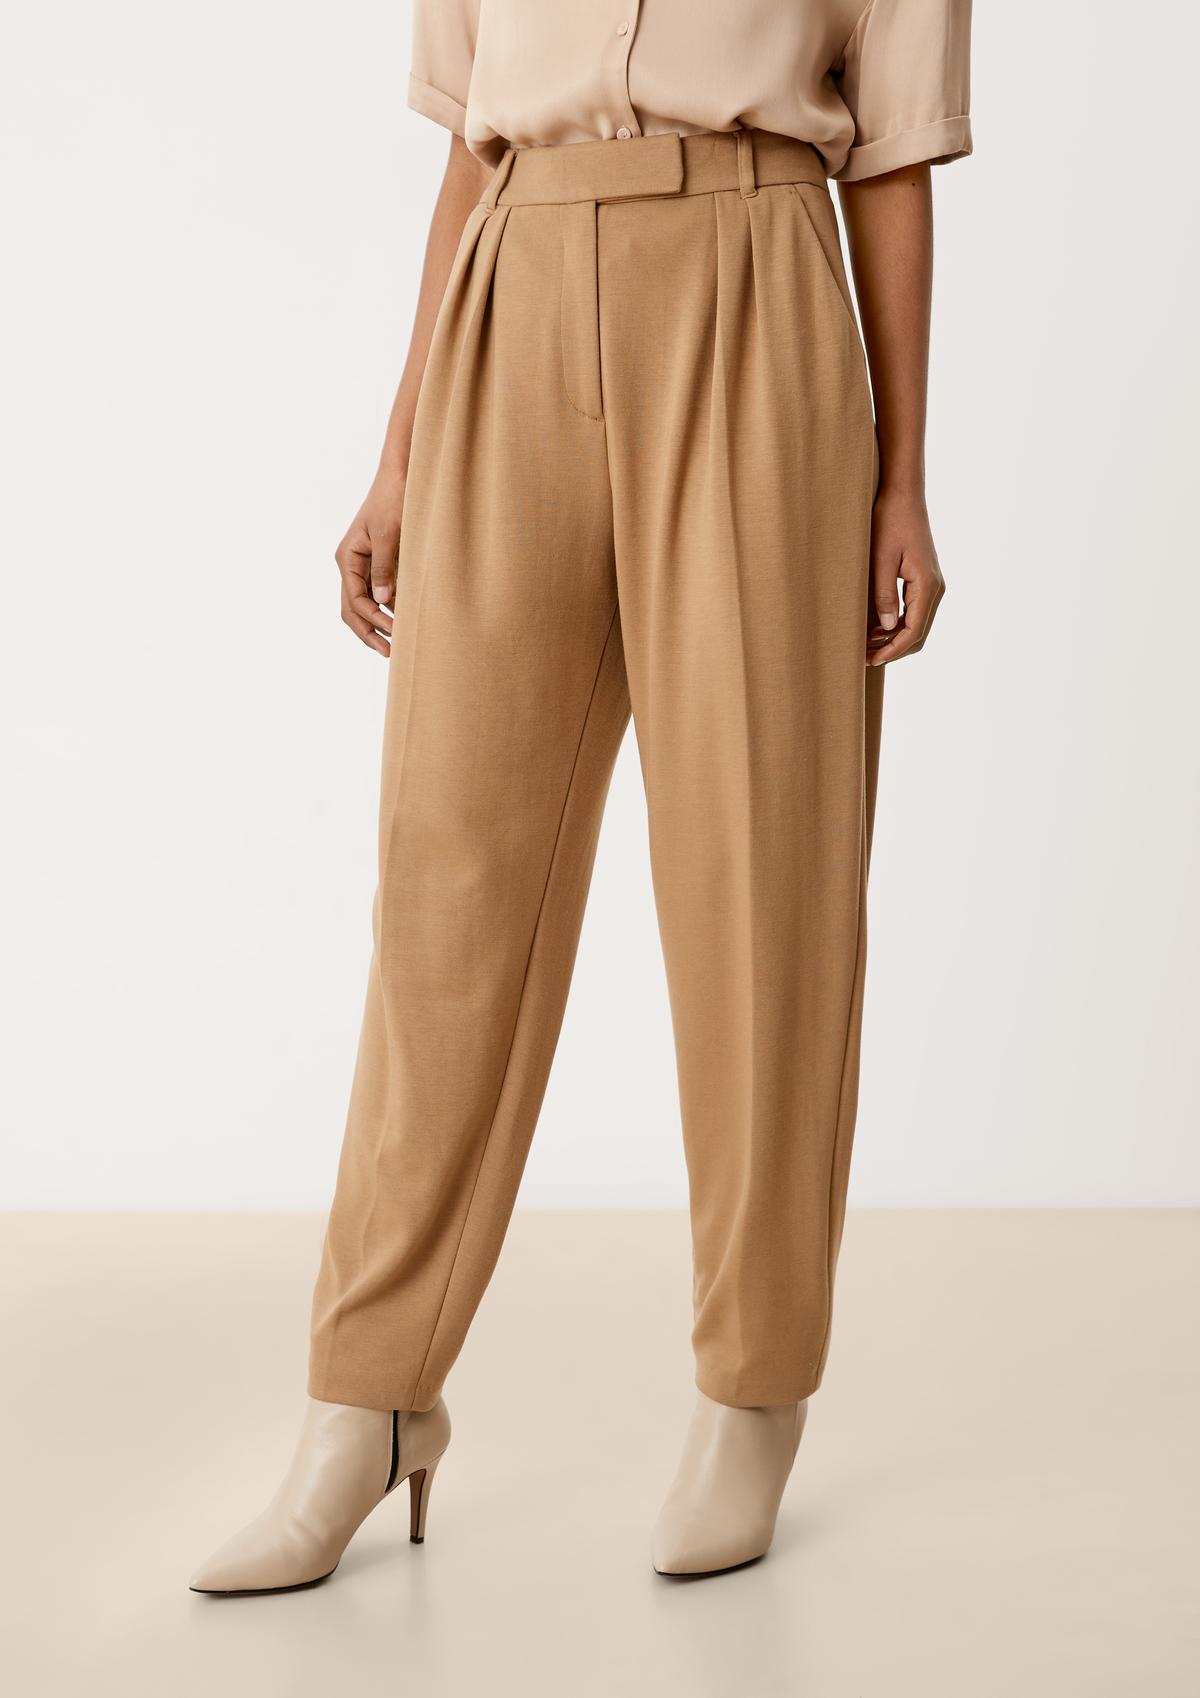 Regular: Trousers with waist pleats